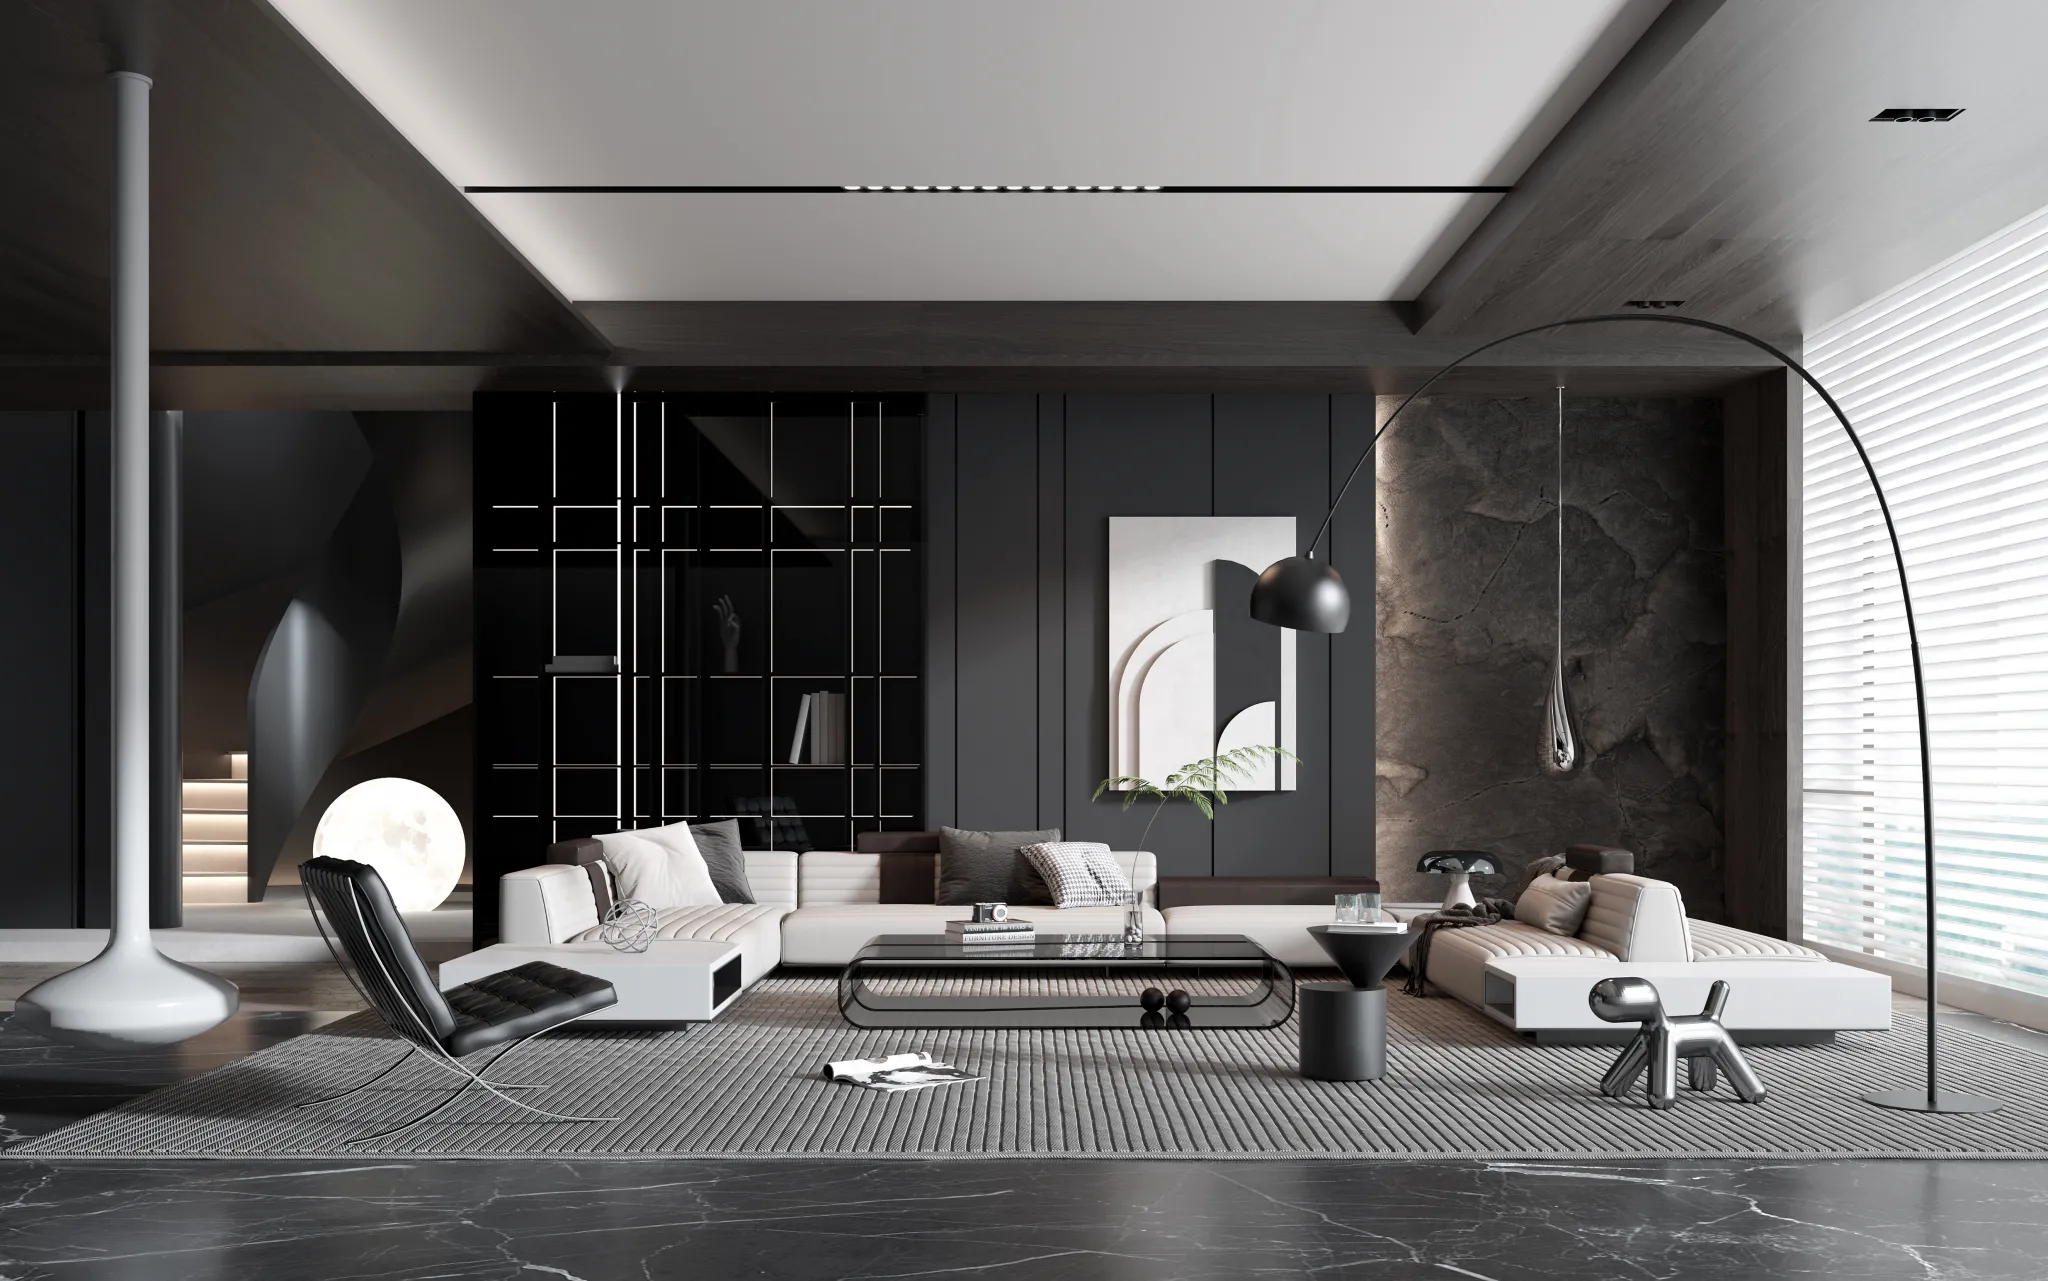 HOUSE SPACE 3D SCENES – LIVING ROOM – 0131